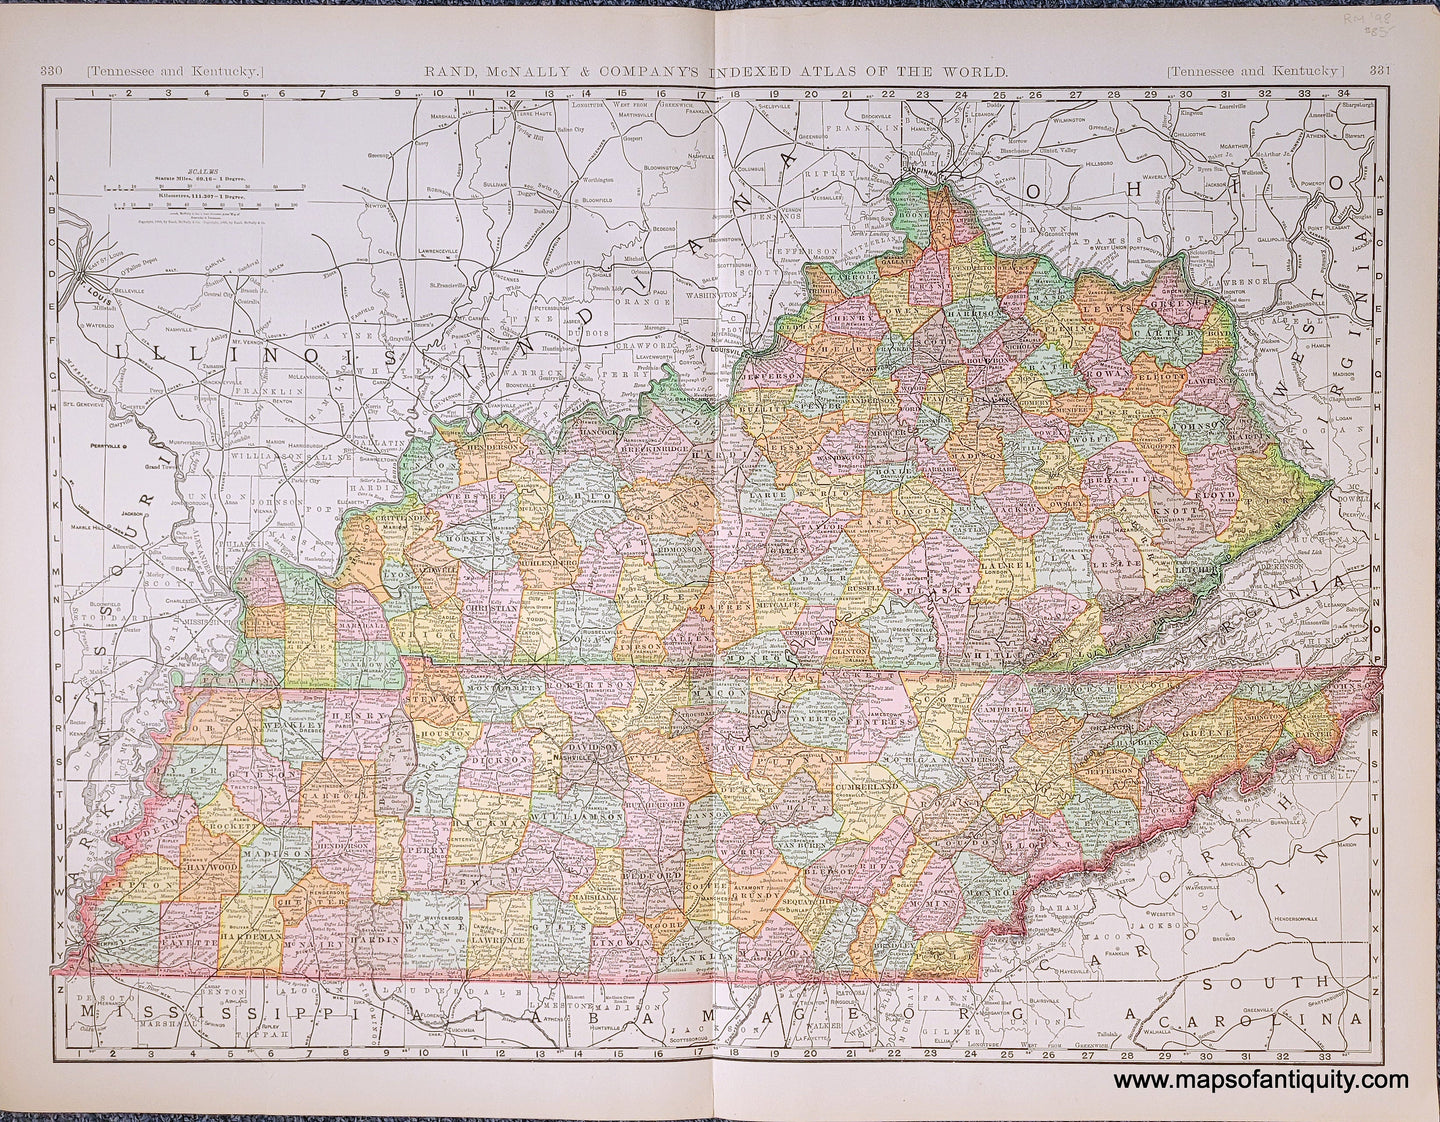 Genuine-Antique-Map-Double-sided-map-Kentucky-and-Tennessee-Louisville-on-verso-Kentucky-Tennessee--1898-Rand-McNally-Maps-Of-Antiquity-1800s-19th-century